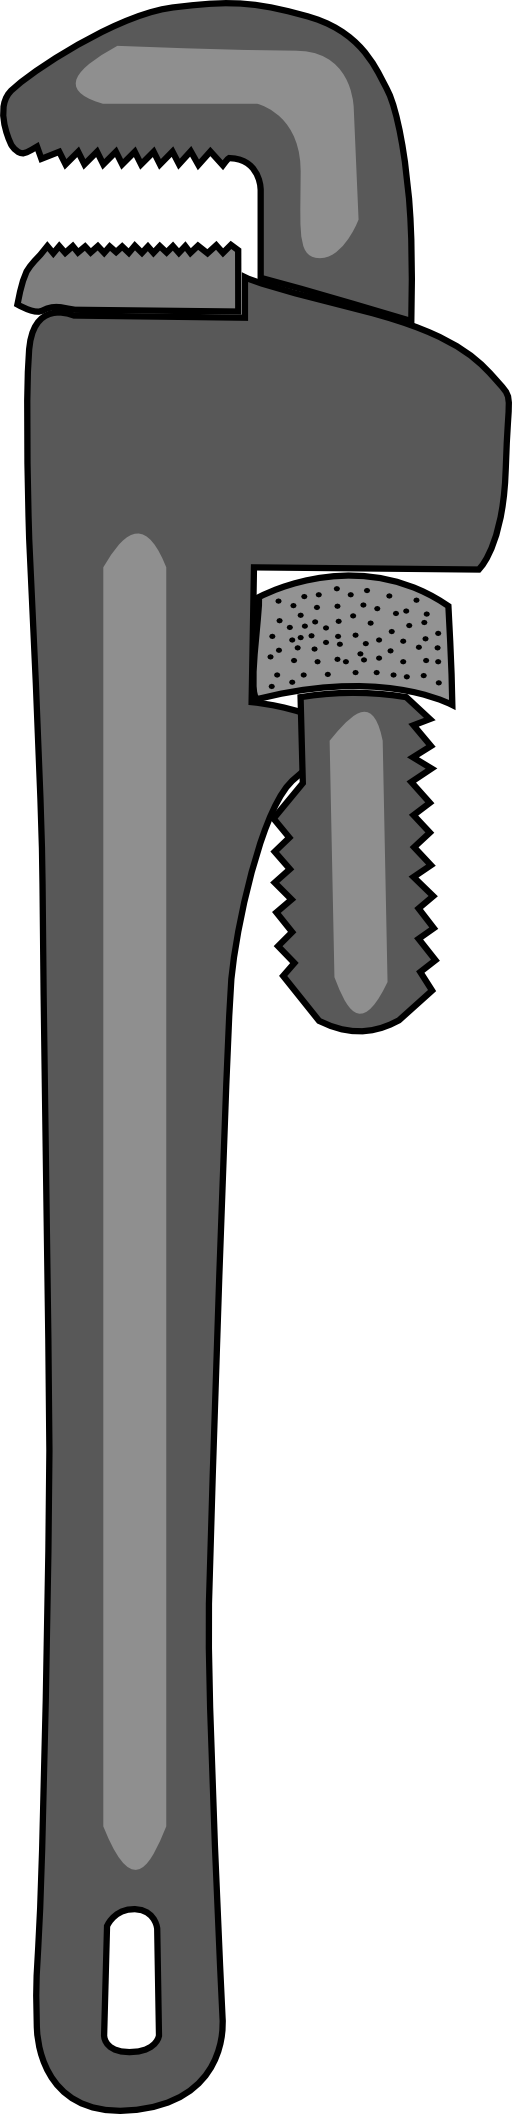 Pipe Wrench Clipart   I2clipart   Royalty Free Public Domain Clipart